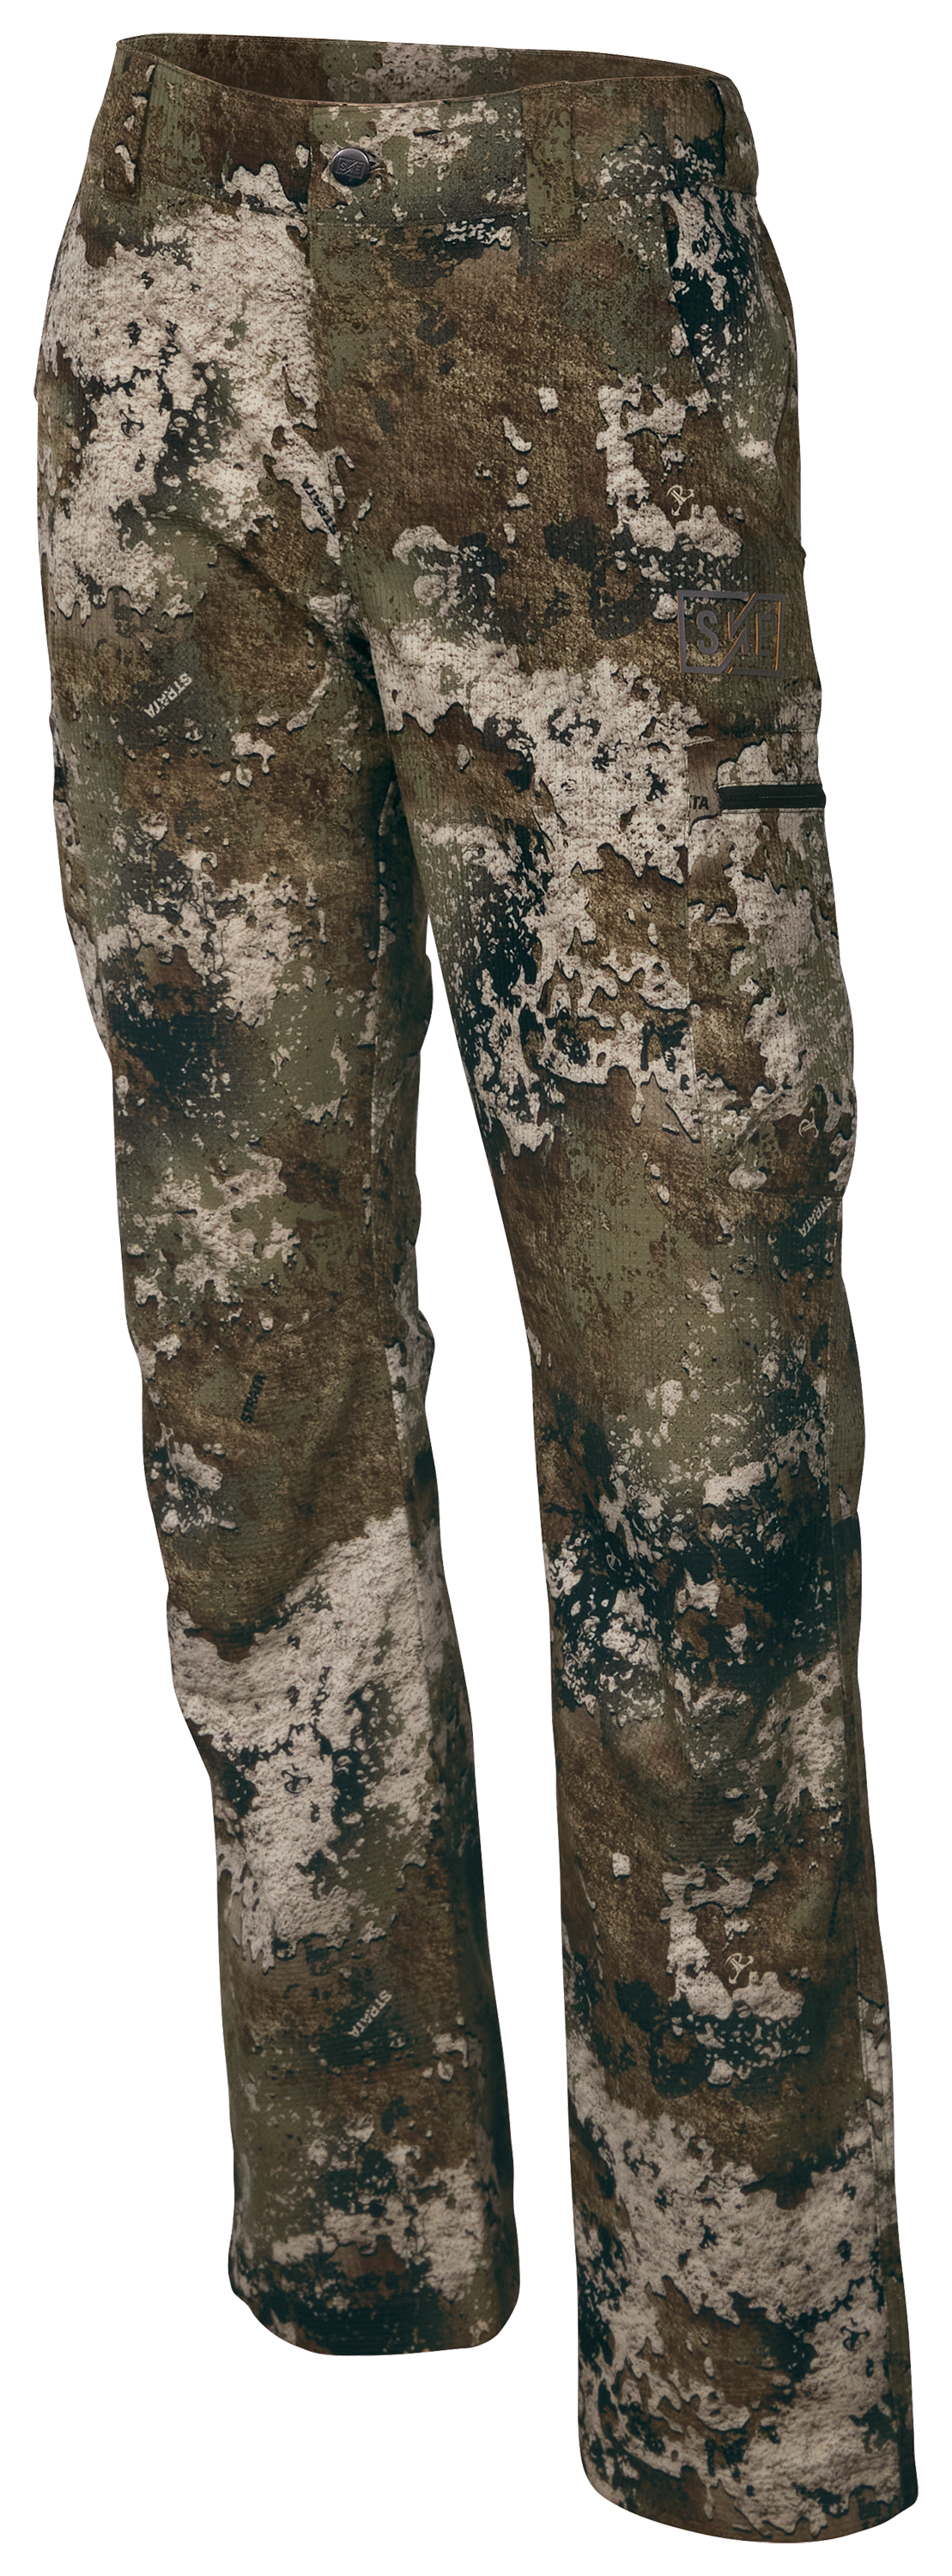 Magellan Outdoors Women's Camo Hill Country 7-Pocket Twill Hunting Pants